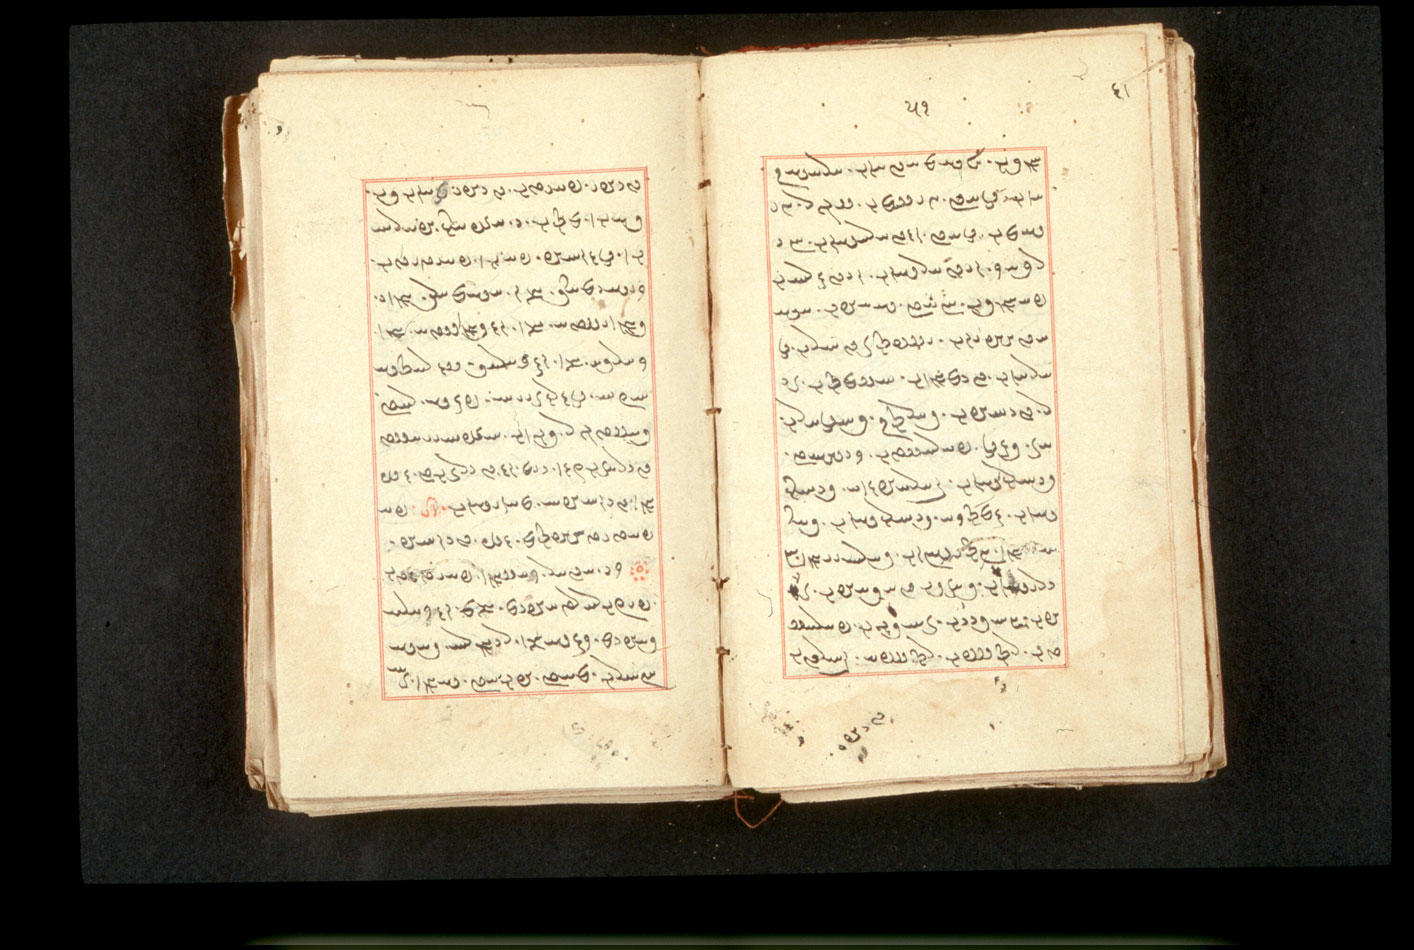 Folios 51v (right) and 52r (left)